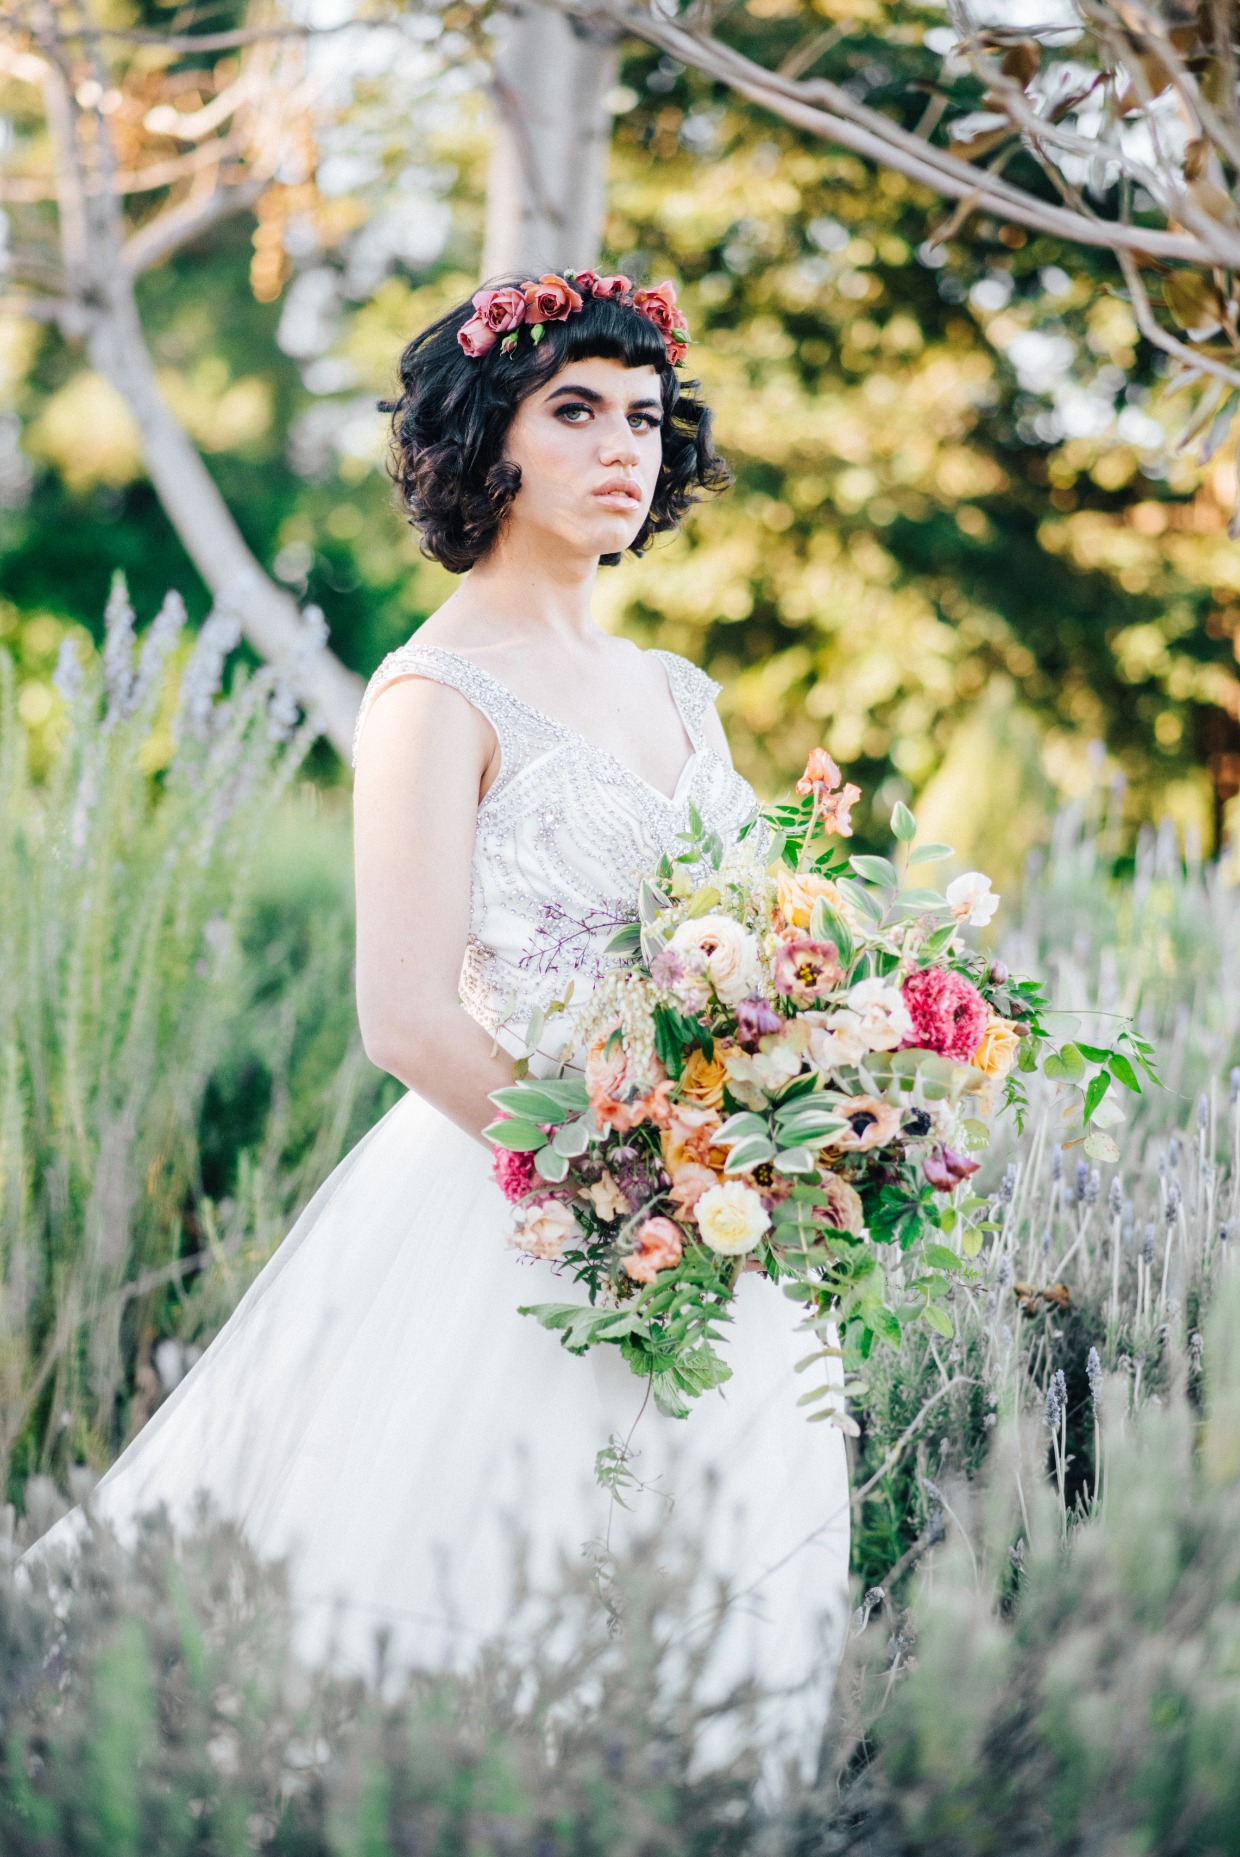 Trans bride floral styled shoot